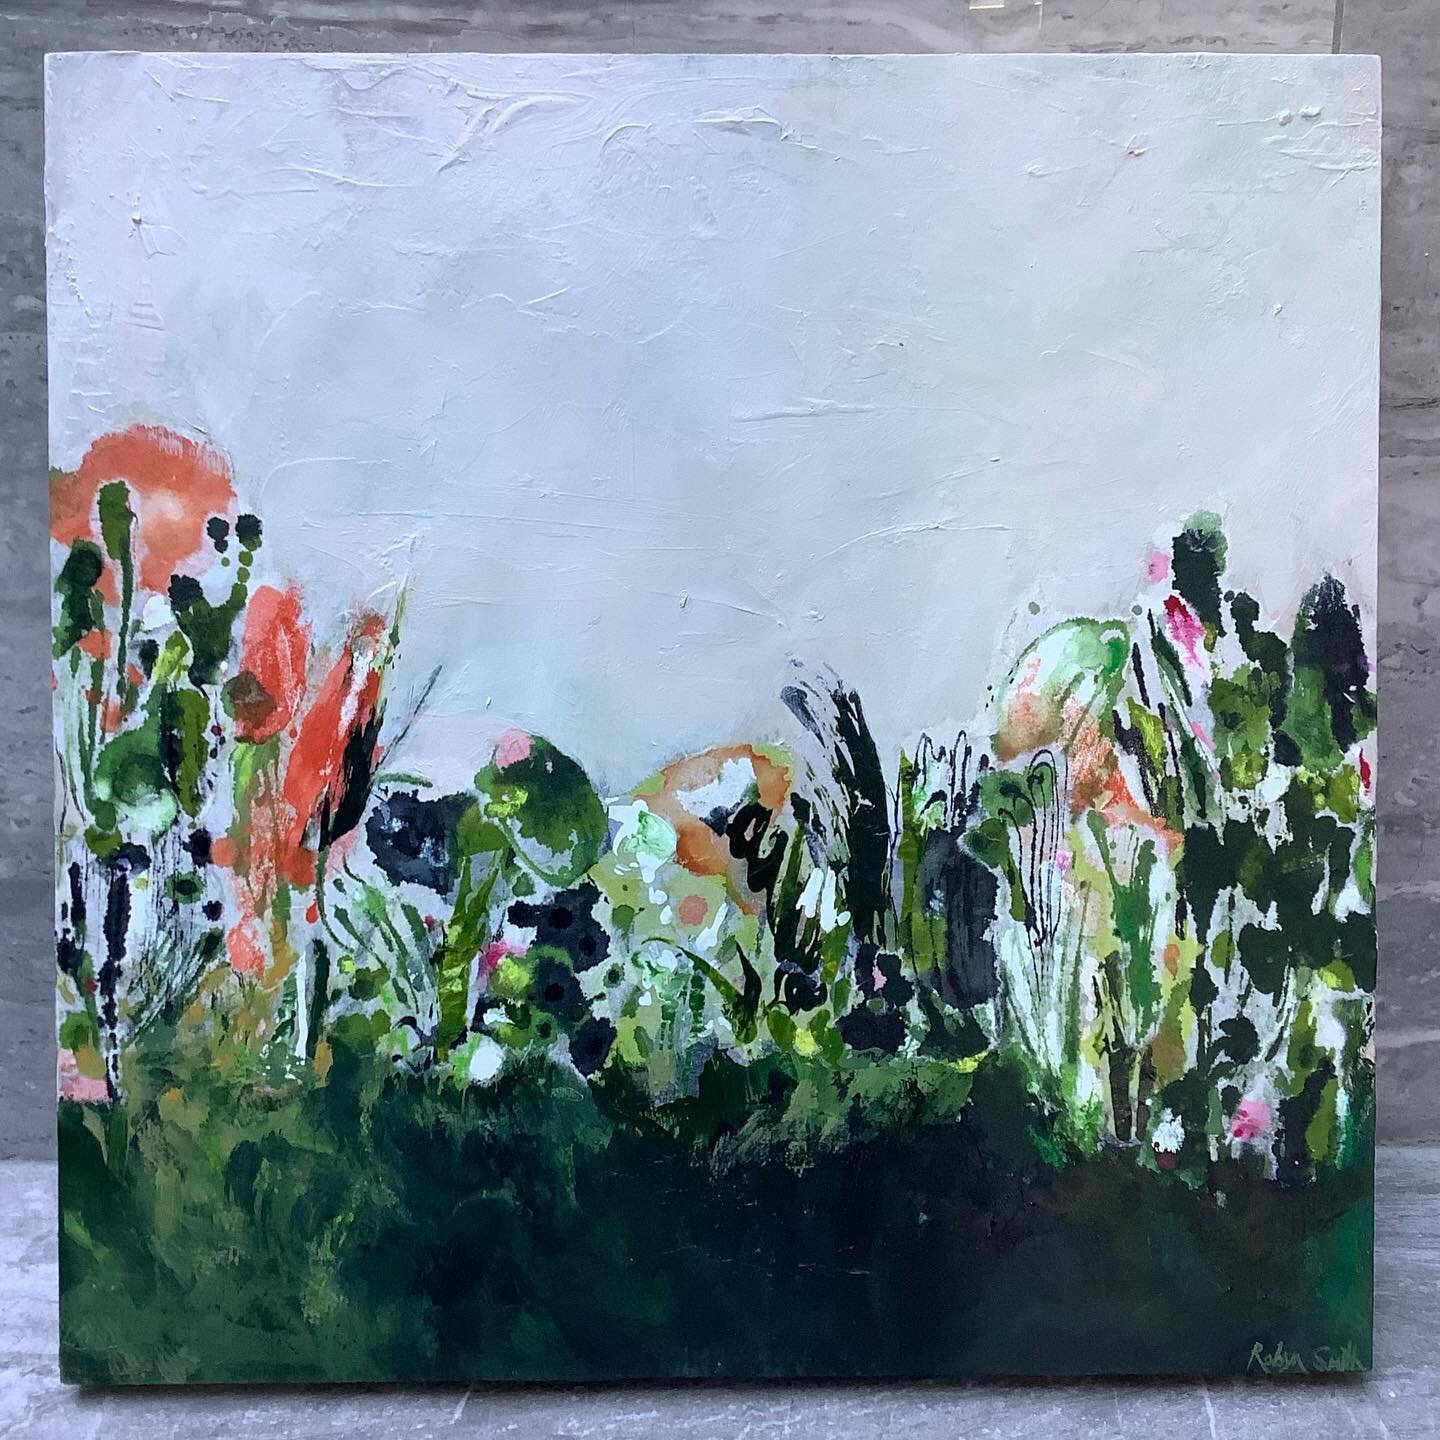 I&rsquo;ve decided the bathroom has the best light for photographing these new ones! This one is 41x41cm and is on board. I&rsquo;m loving the freedom of the collage! 😊 #collageart #collageartwork #collageartist #abstractlandscapes #flowers #flowerp